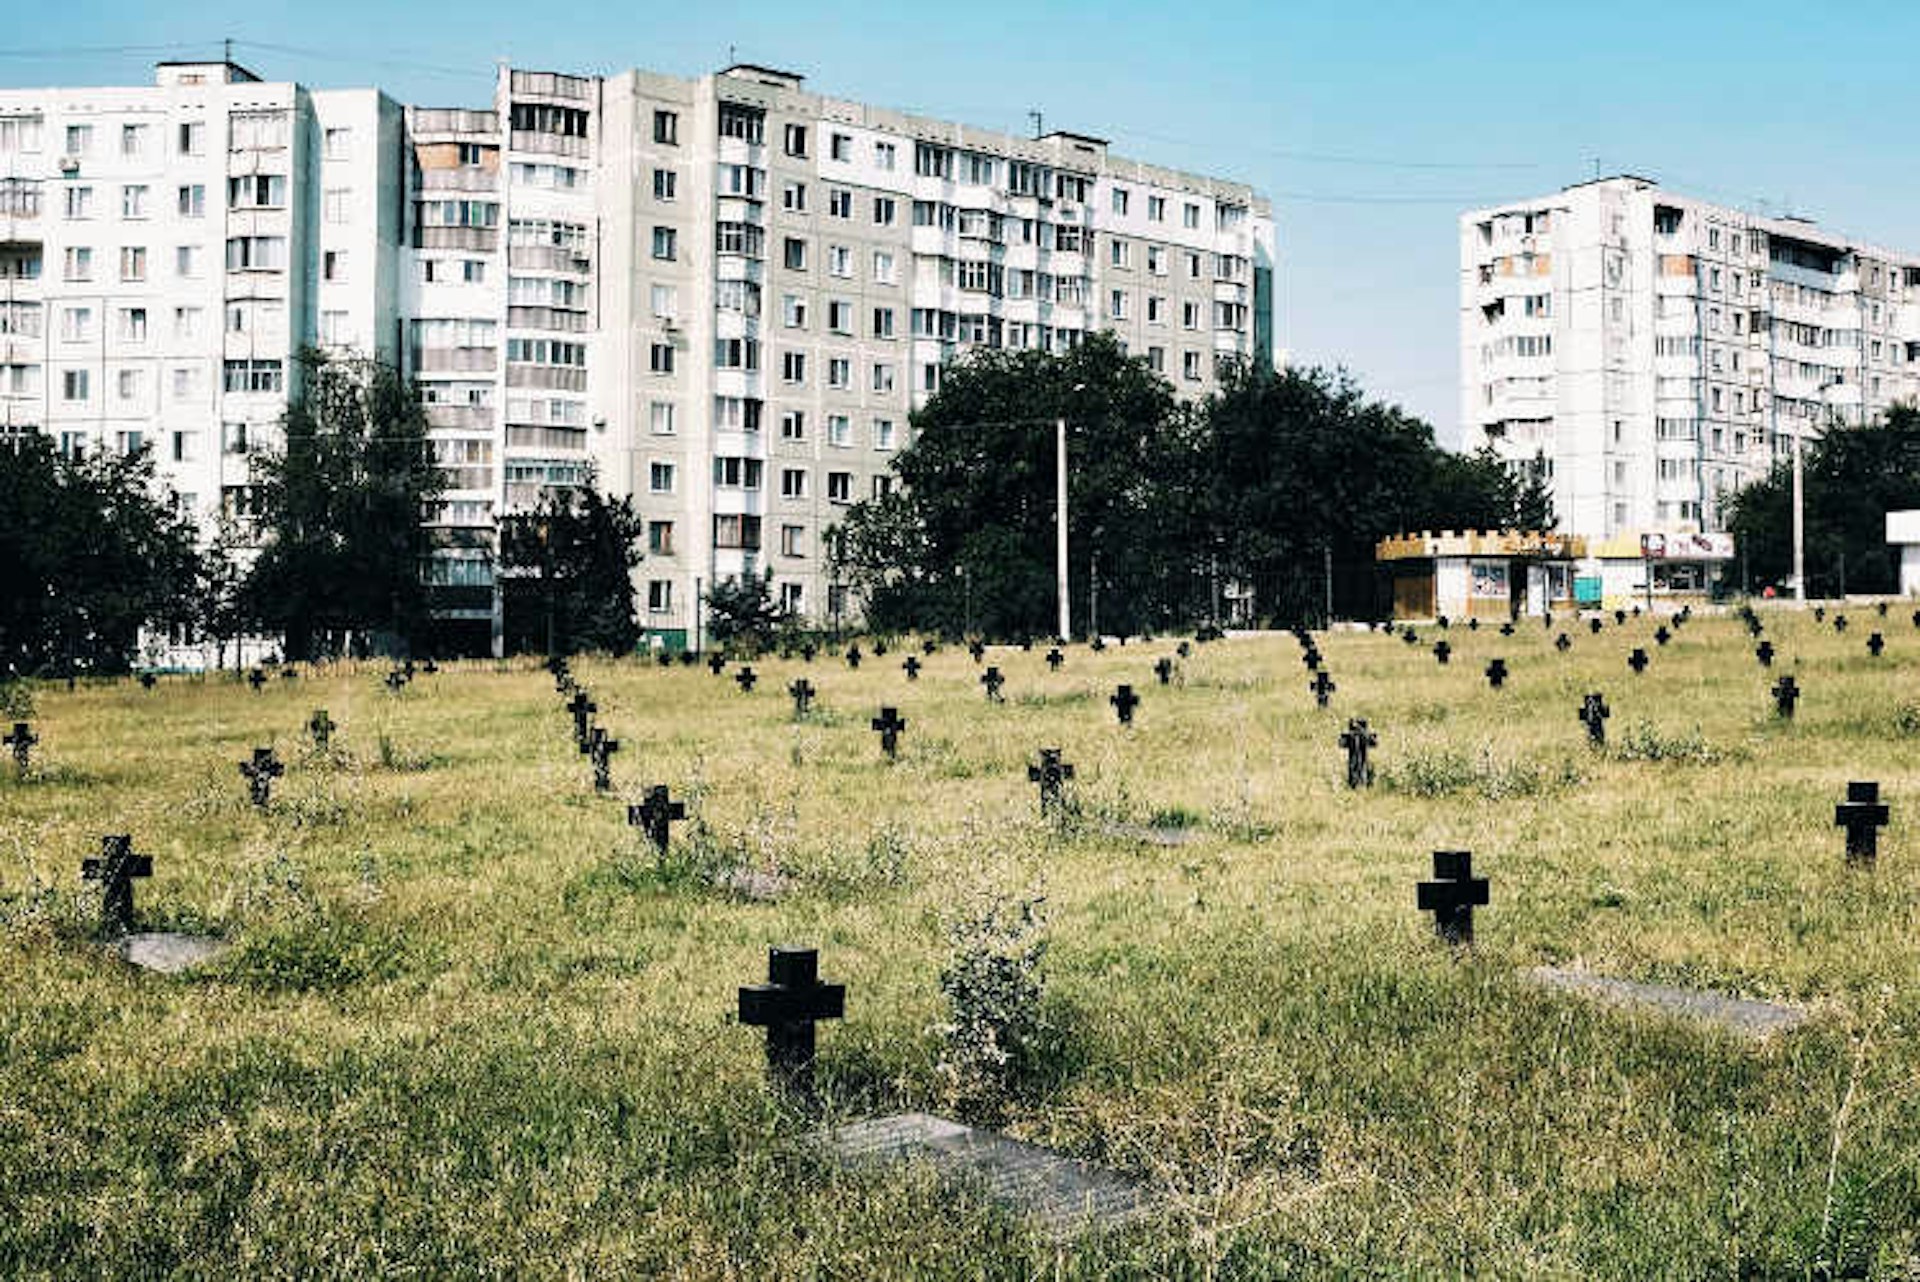 Graves from the 1992 civil war, Transdniestr. Image by Mark Baker / Lonely Planet